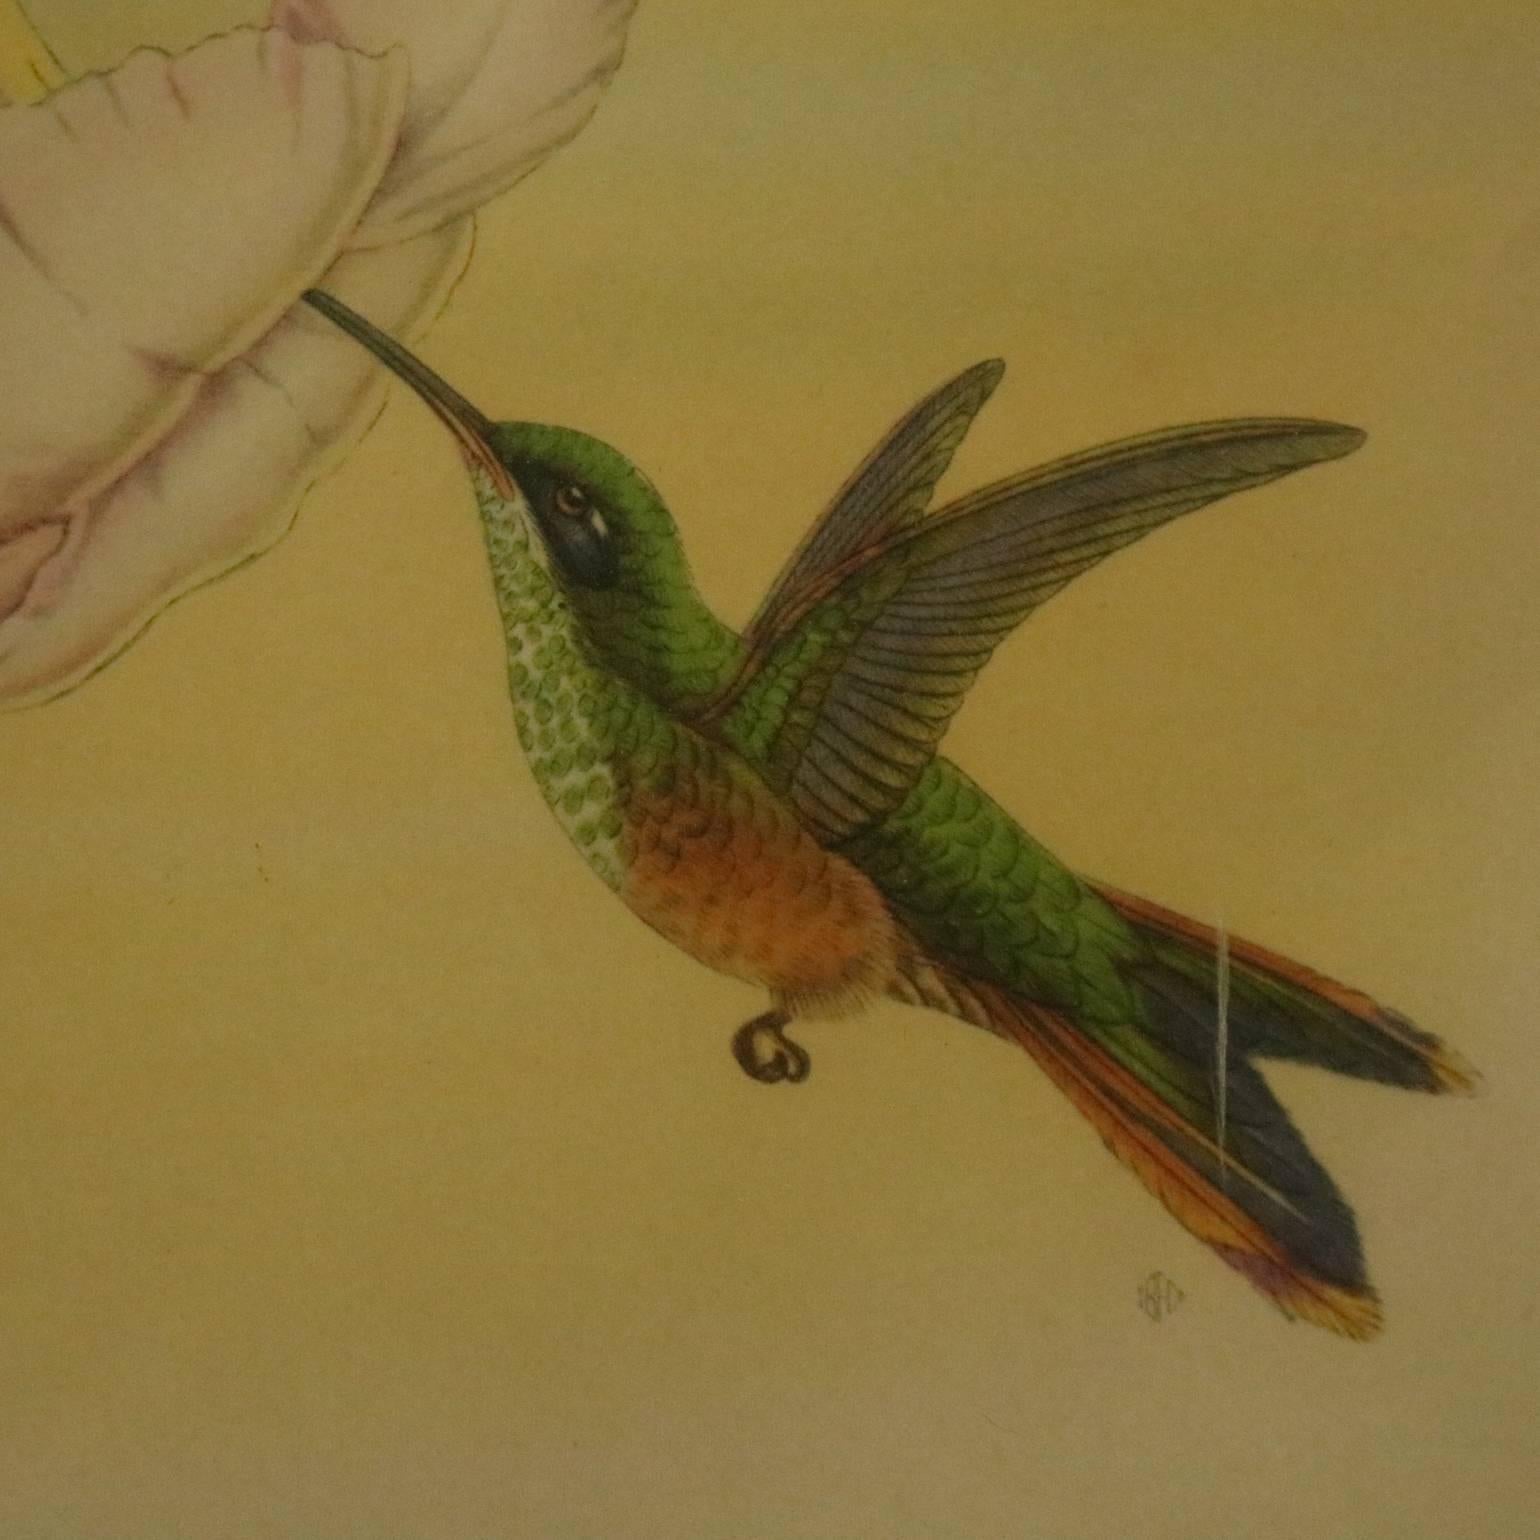 J. Gould (English, 19th century) ornithological hand tinted bird study lithograph of Hylonympha Macrocerca (Scissor-Tailed Hummingbird) done with W. Hart and Petasophora Iolata ( Hummingbirds) done with H.C. Richter, 19th century

Measure: